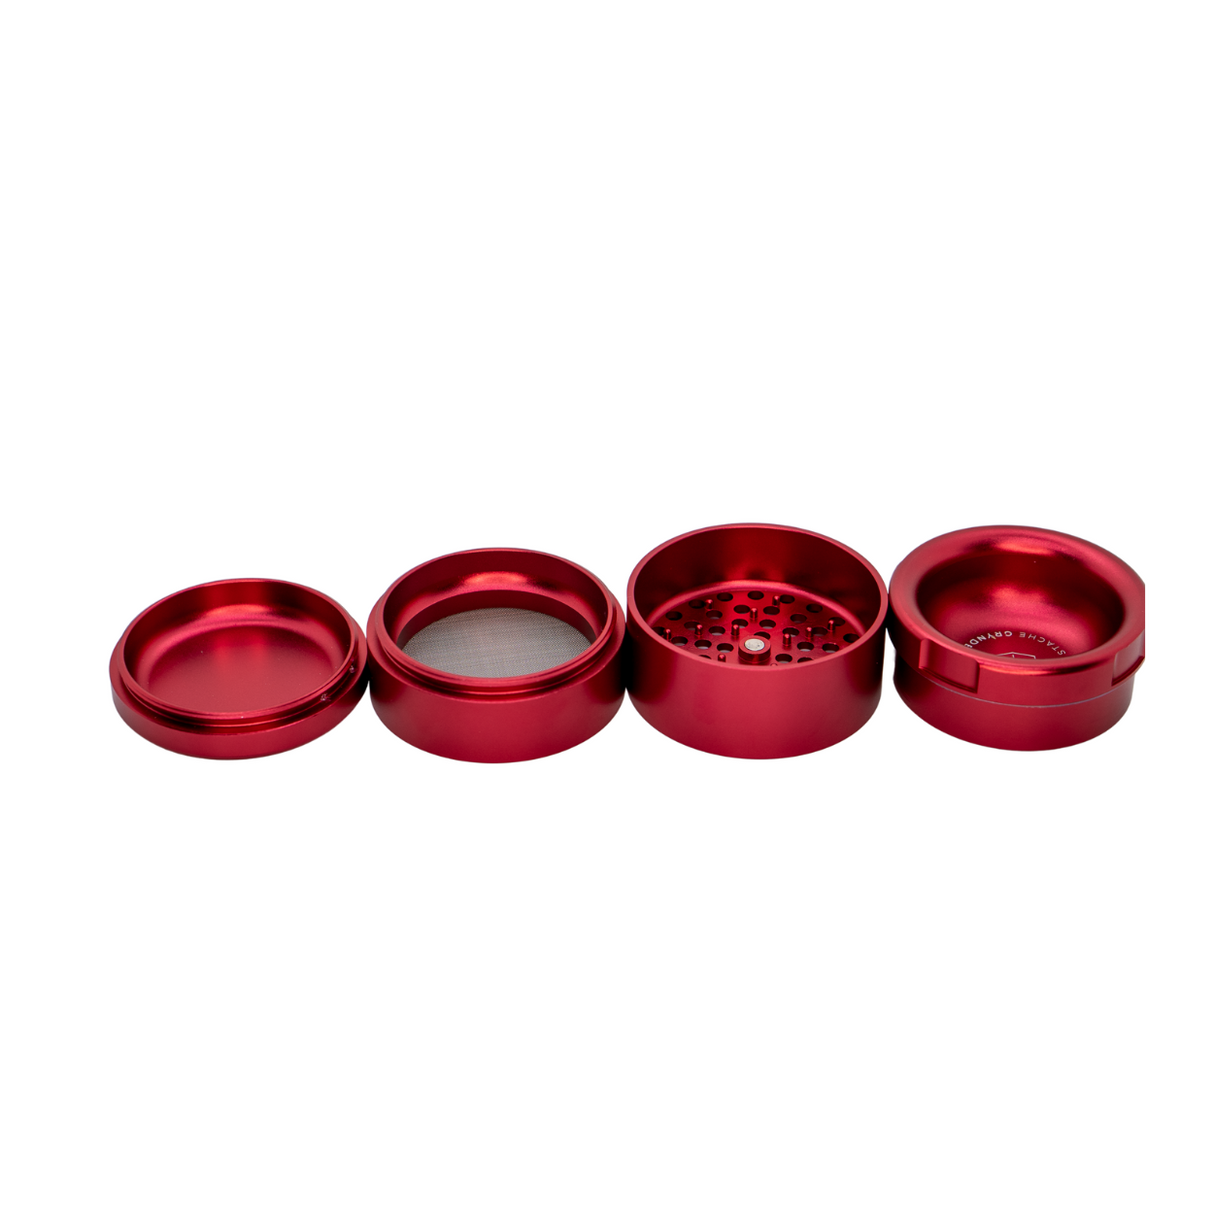 Stacheproductswholesale Grynder (N.Y.A.G) 4 Piece Grinder in Red - Disassembled View